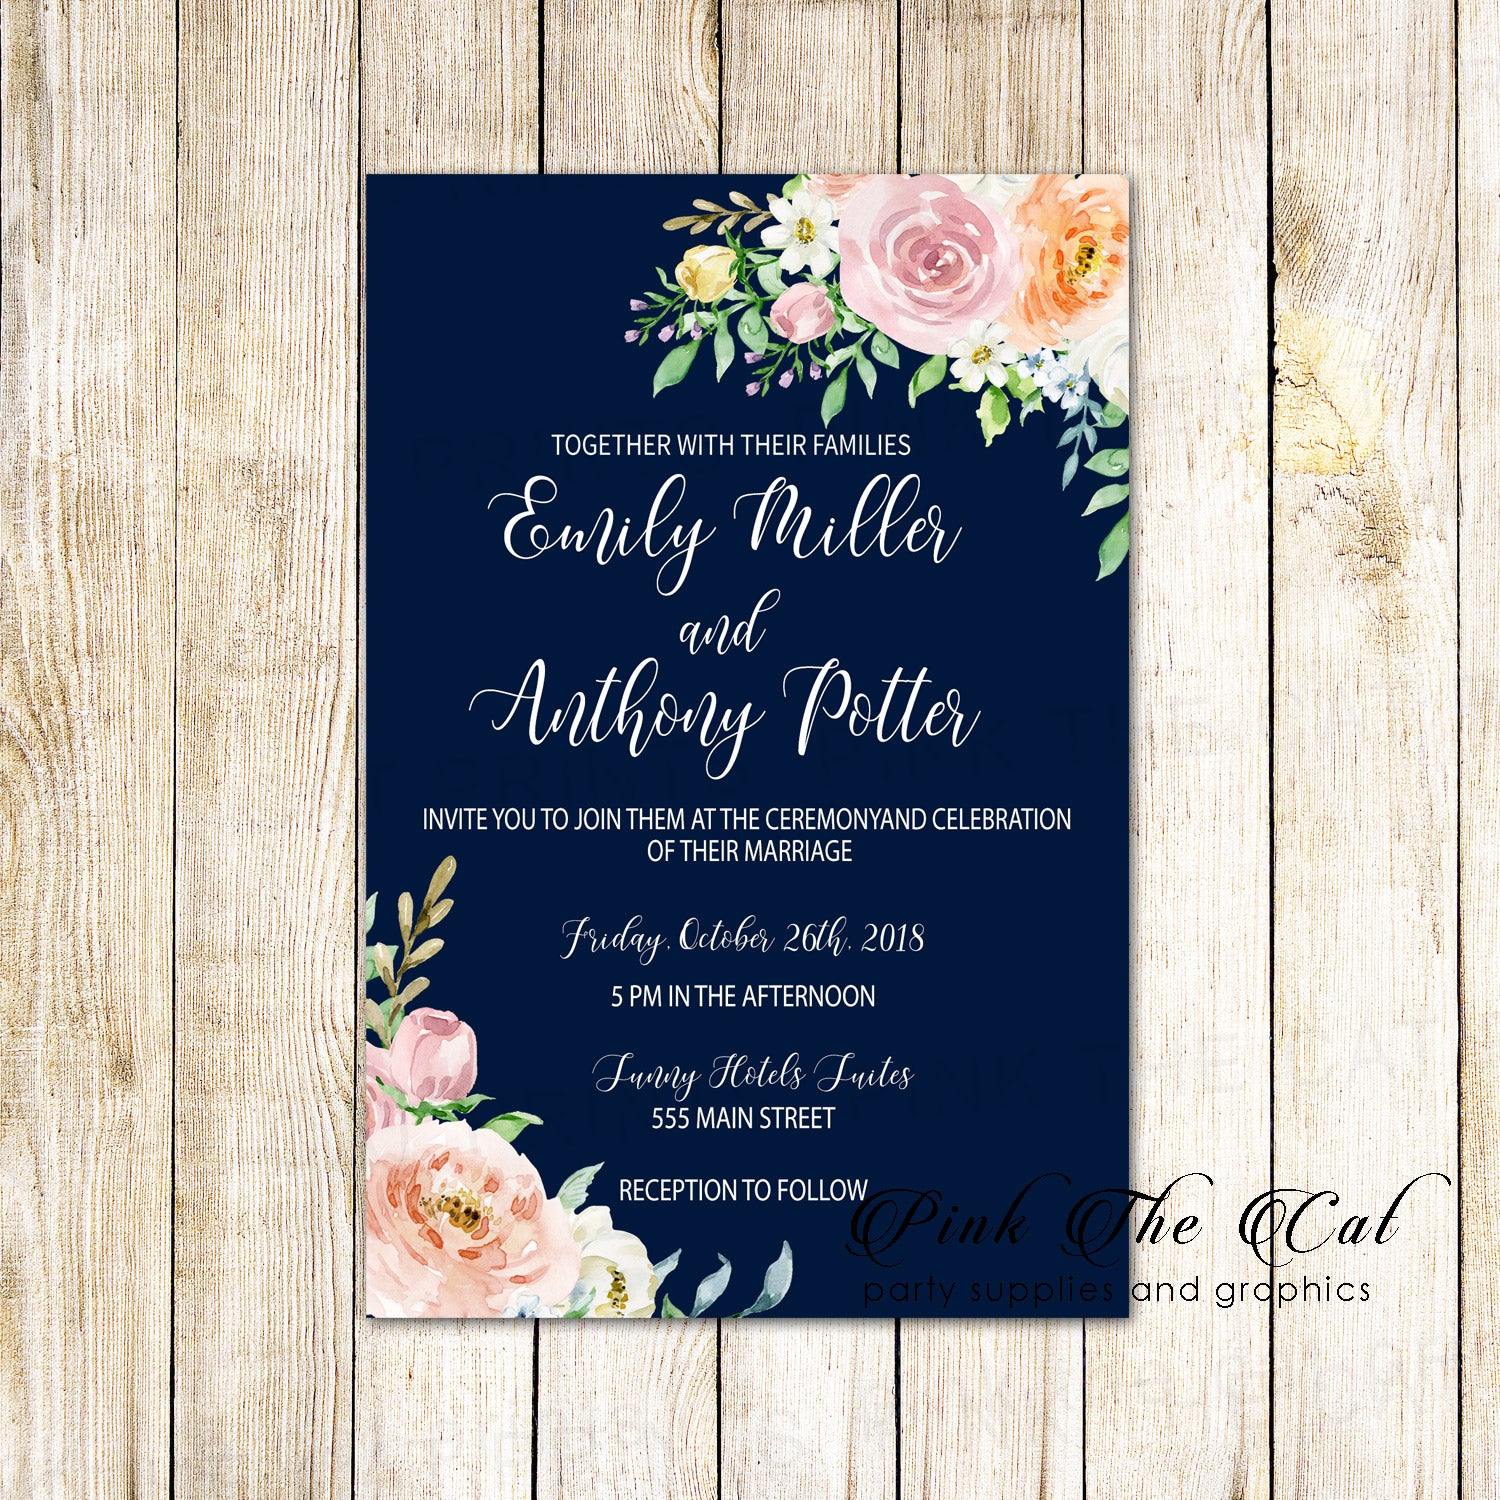 100 wedding invitations navy blue blush pink floral personalized